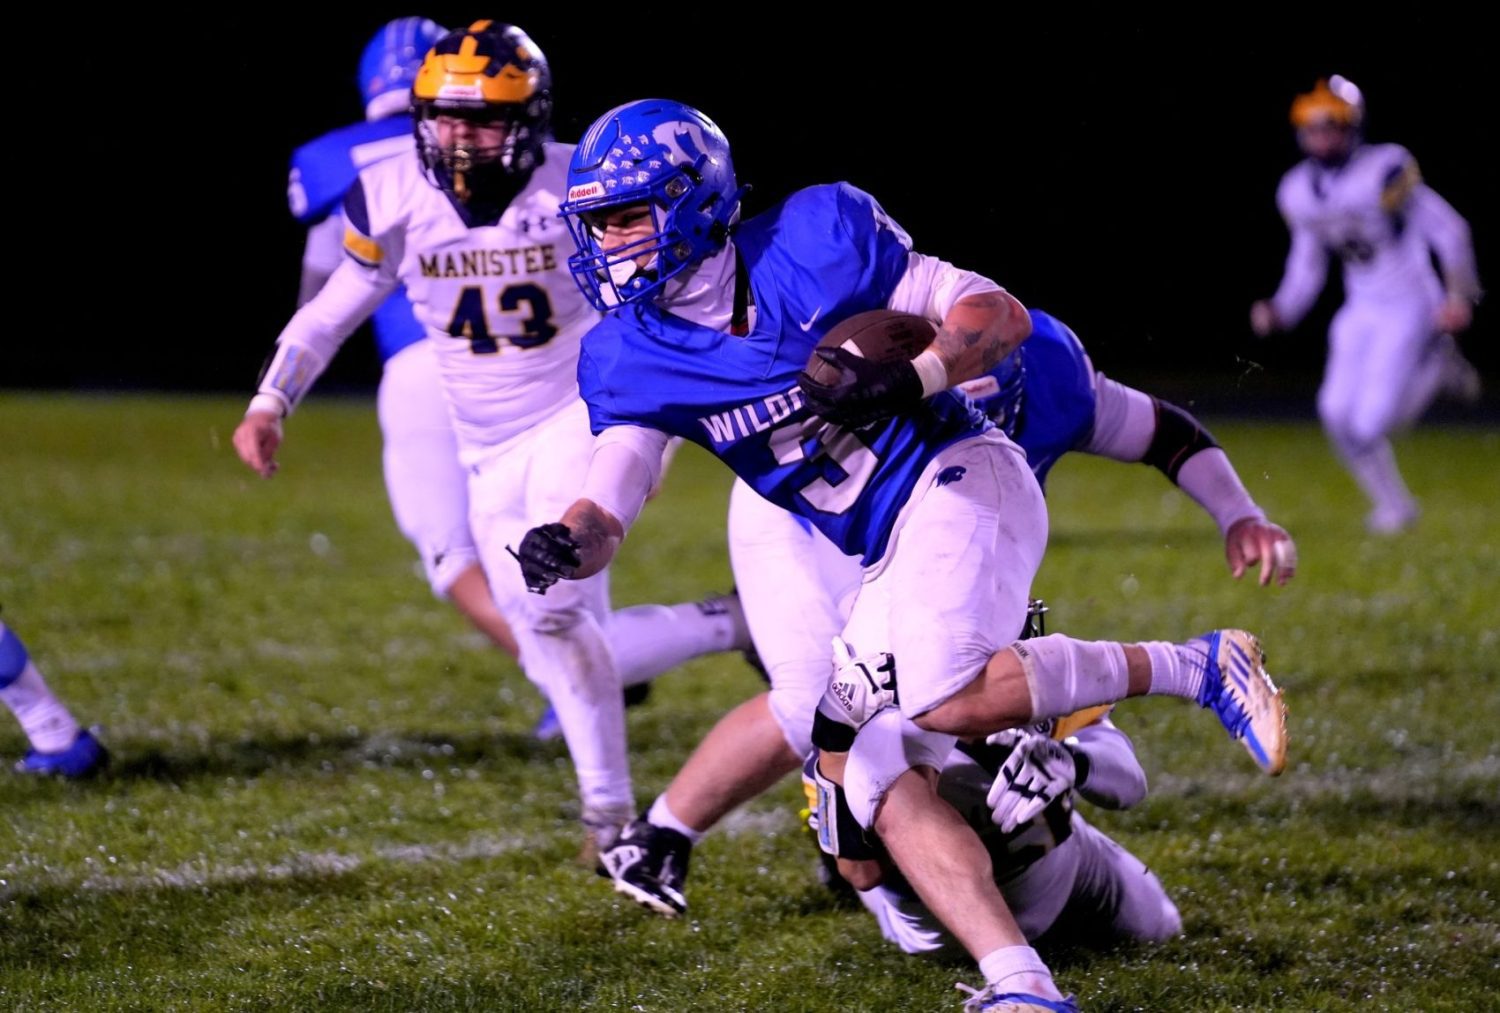 Montague helps playoff chances with home victory over Manistee